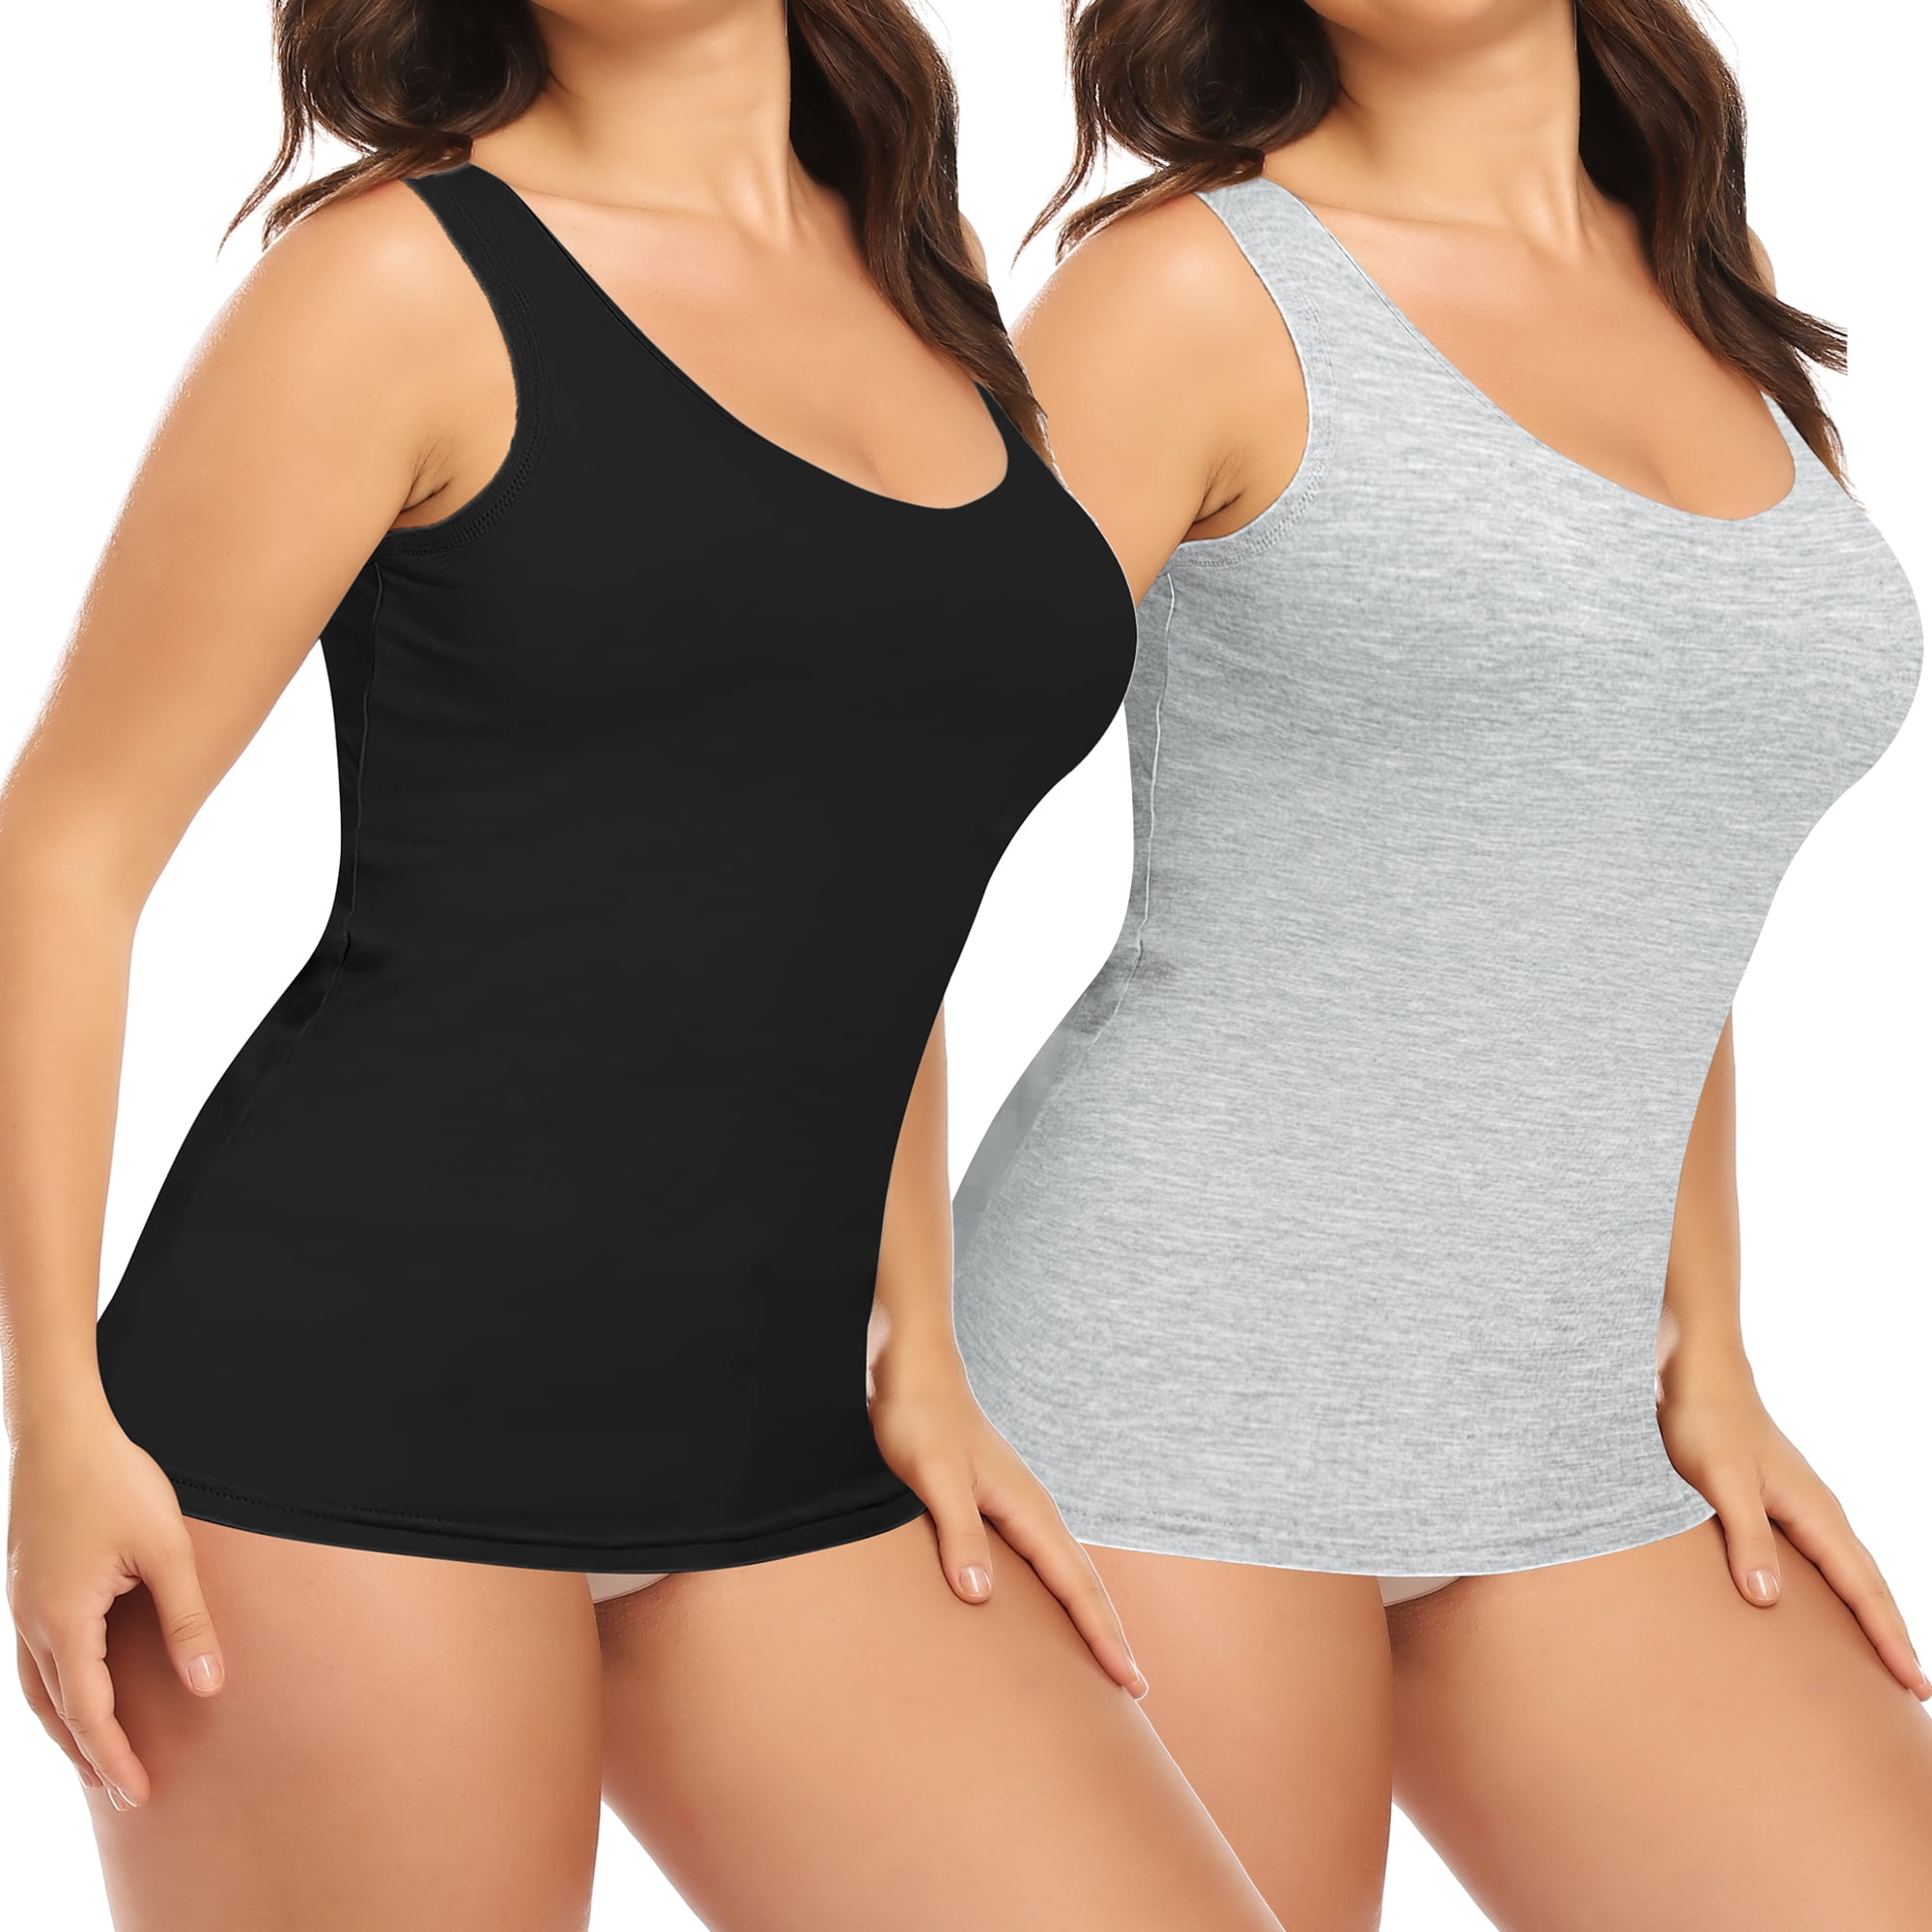 Camisoles for Women with Built in Bra Basic Layering Tank Top  Undershirt(S-3XL)